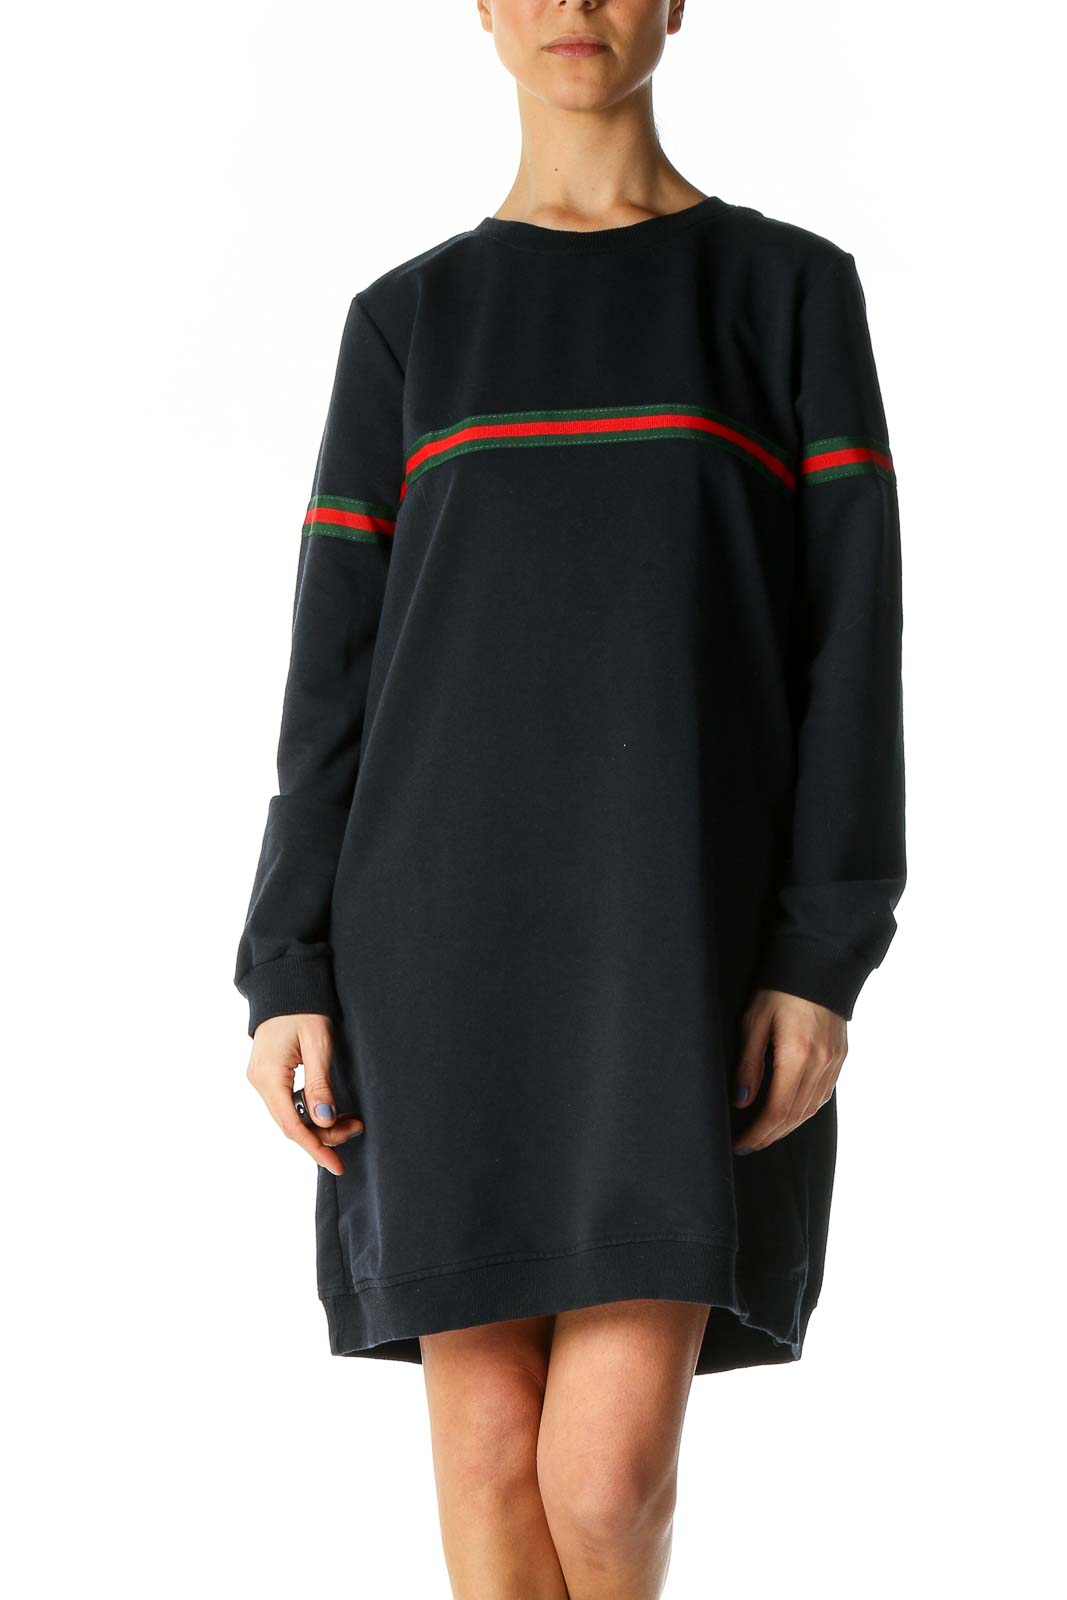 Black Solid Casual Shift Dress Front